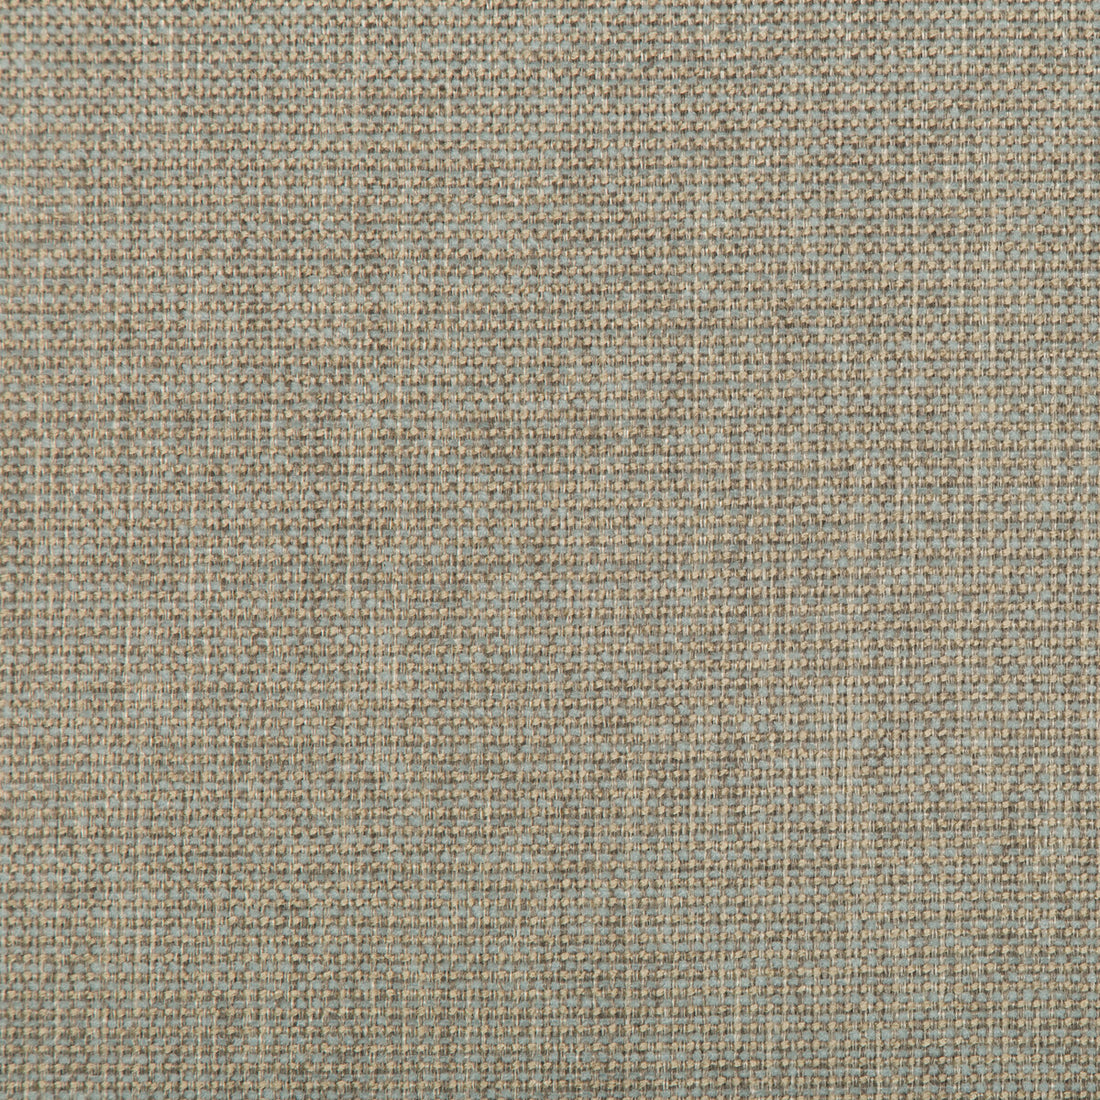 Burr fabric in haze color - pattern 35745.1511.0 - by Kravet Contract in the Value Kravetarmor collection